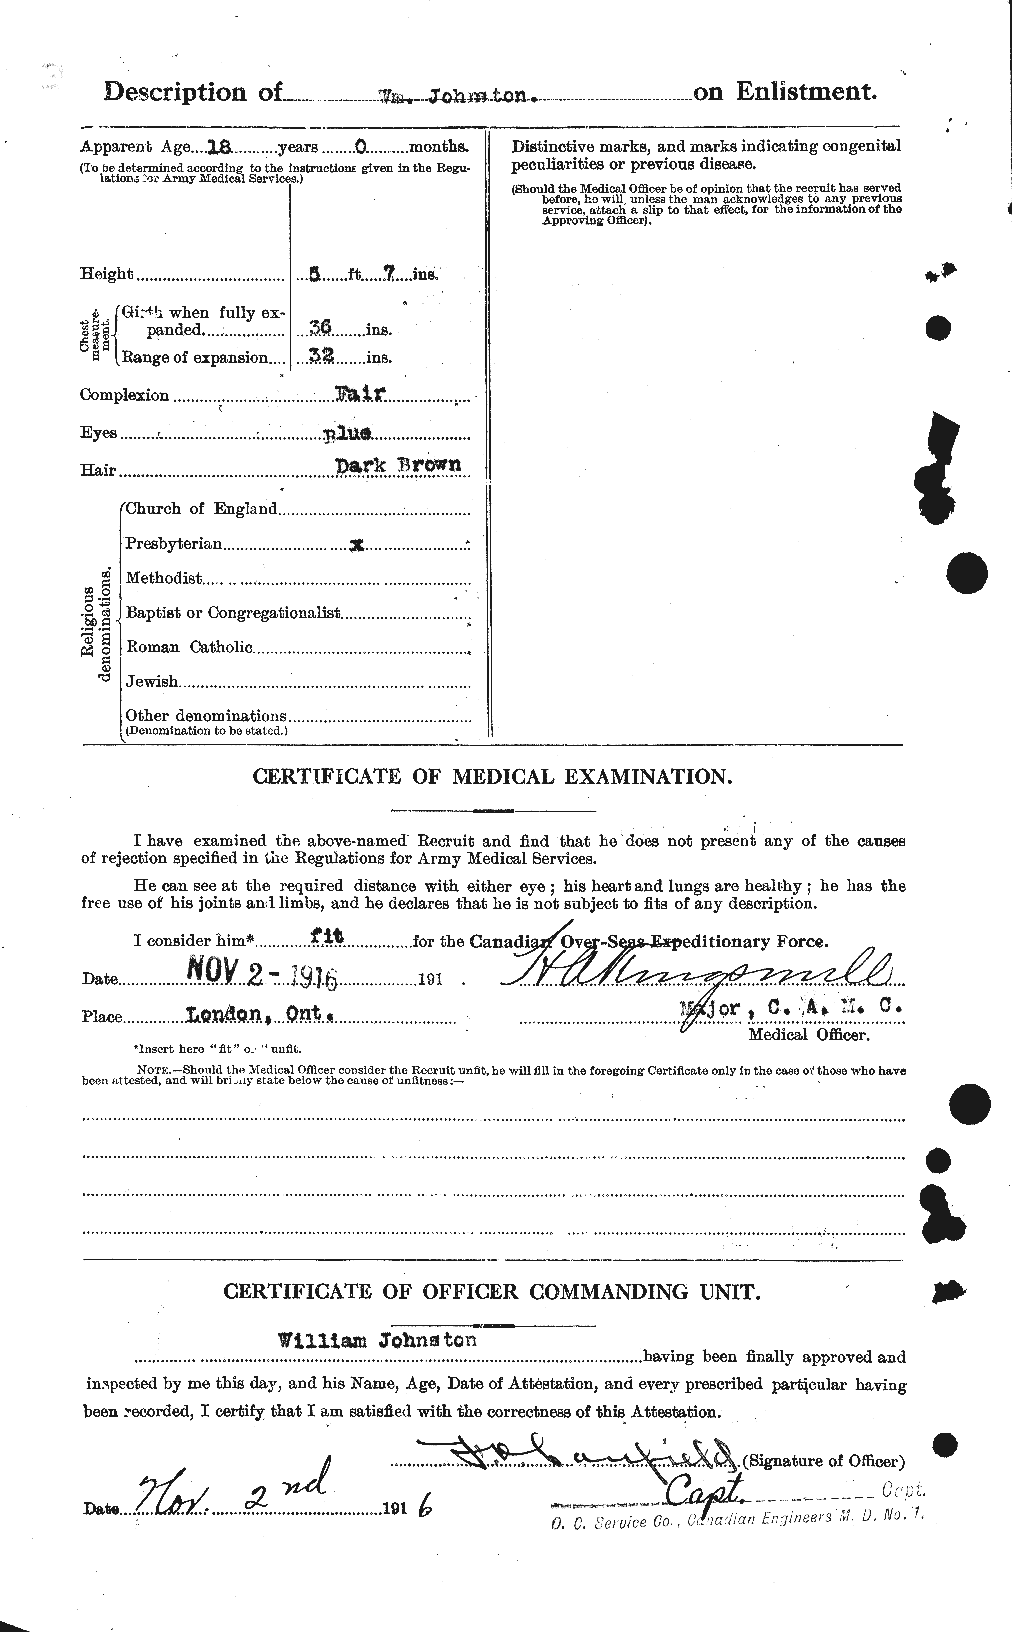 Personnel Records of the First World War - CEF 427288b